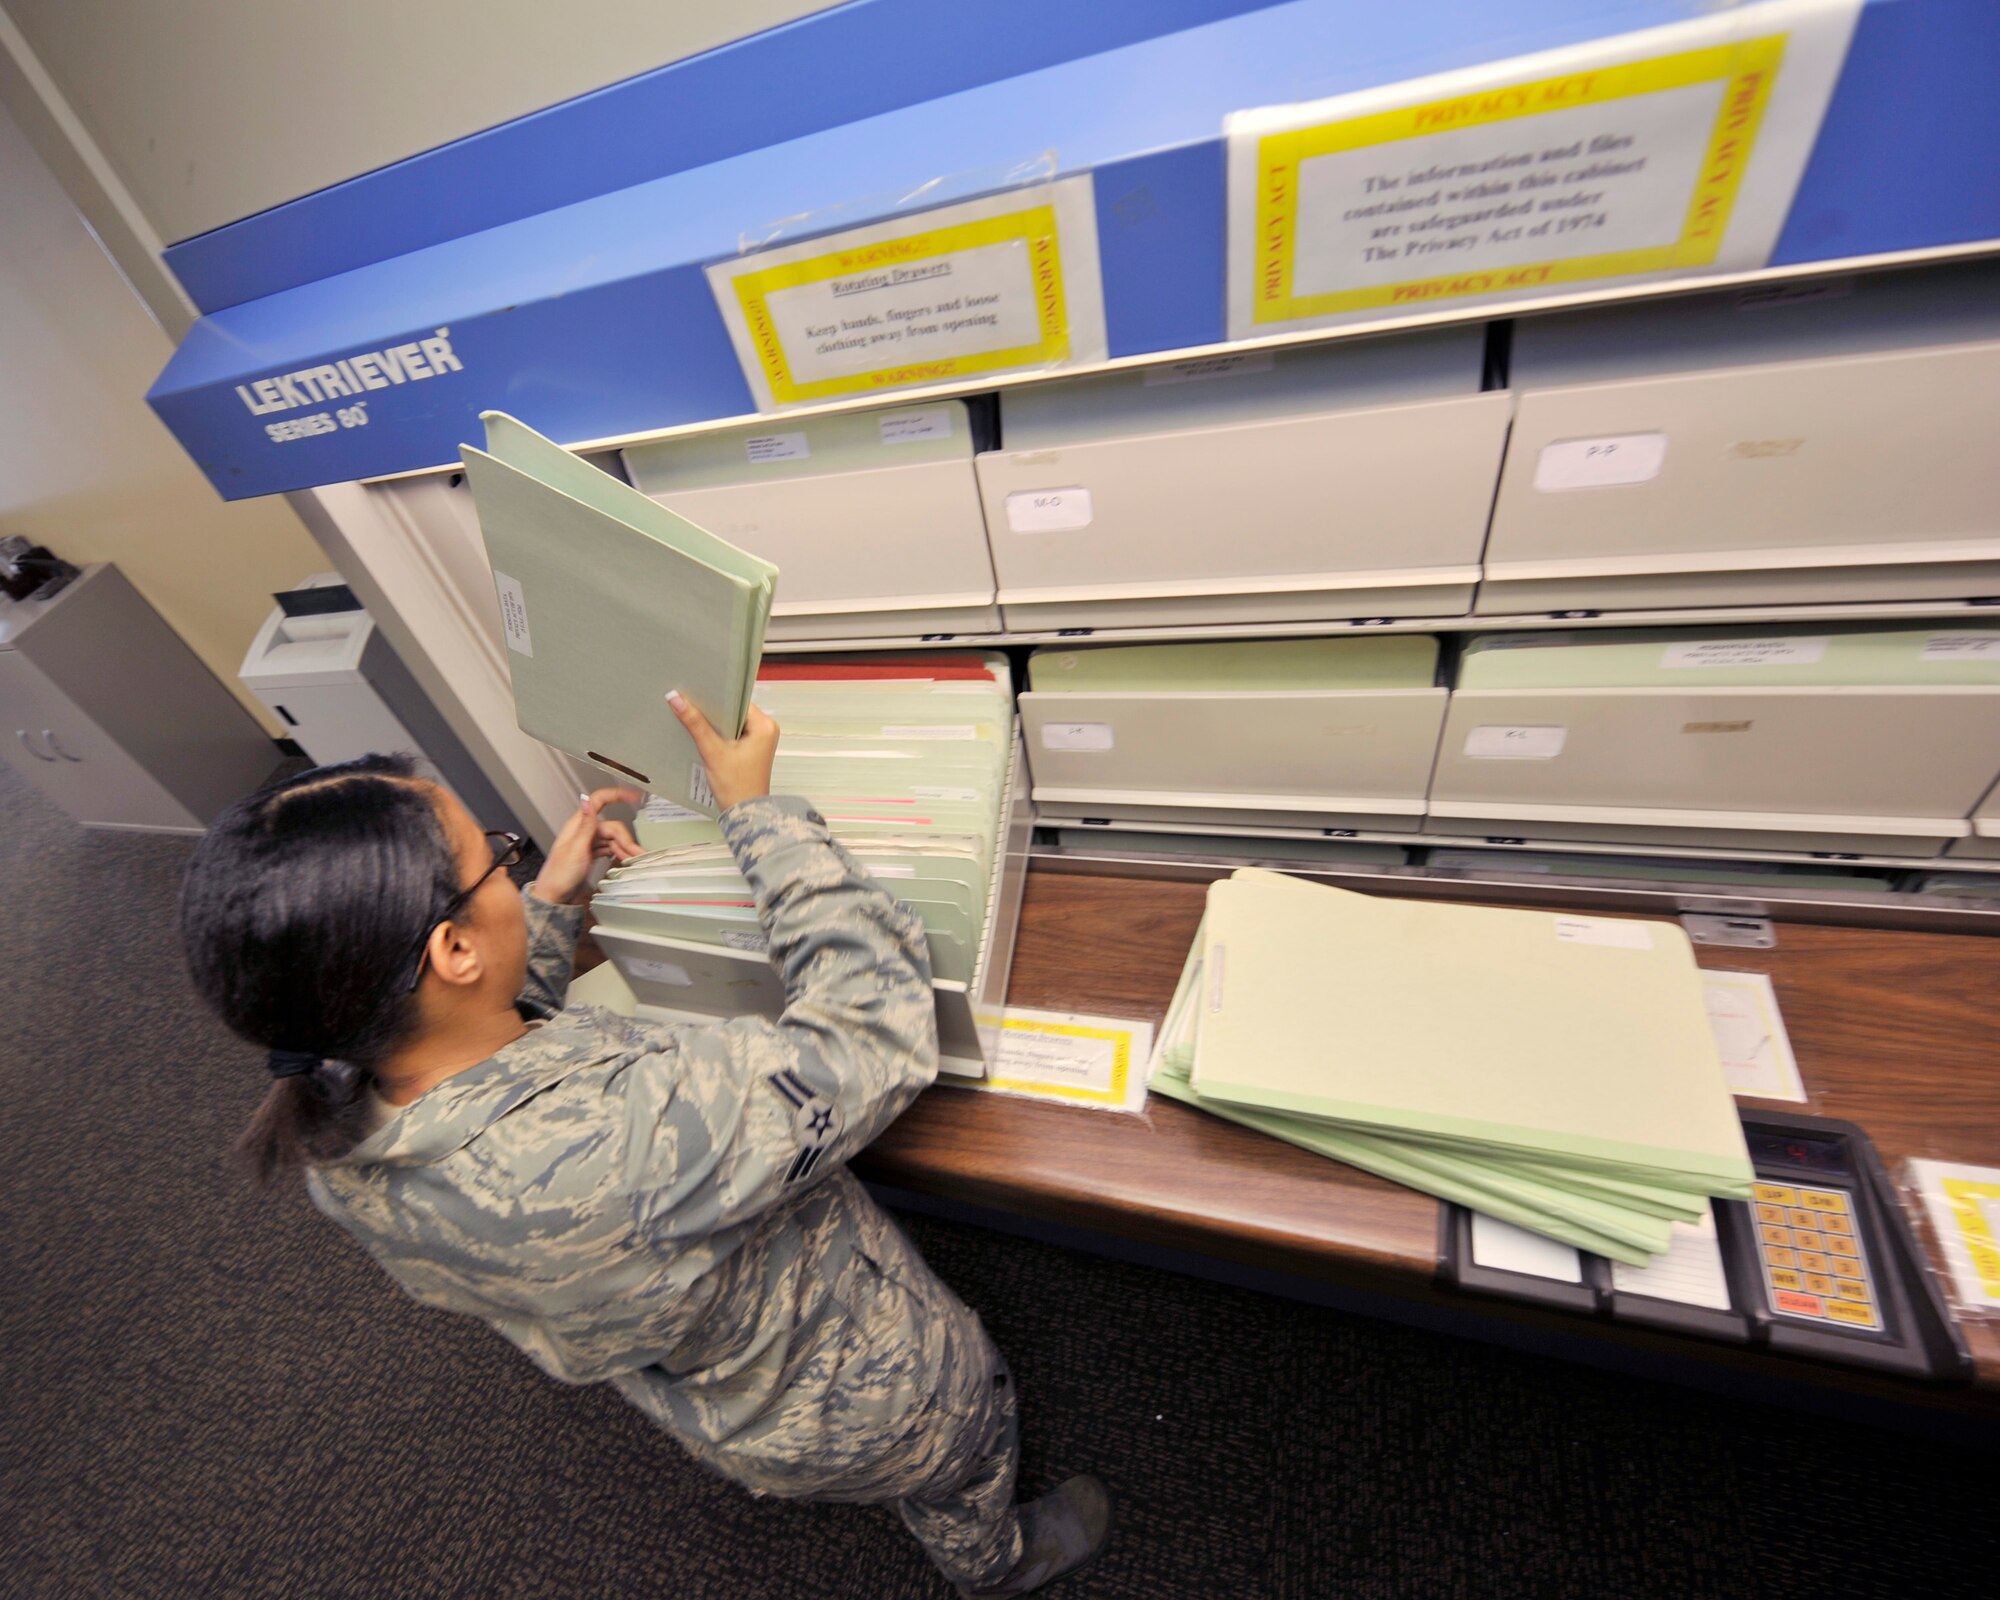 Airman 1st Class Nicole Cofey, an aviation resource manager with the 2nd Operations Support Squadron, puts aircrew members? files into the electriever filing system in the Host Aviation Resource Management office on Barksdale Air Force Base, La., Jan. 19. The electriever is an electronic filing device making it easier to keep track of the 725 aircrew records kept there. (U.S. Air Force photo/Senior Airman Chad Warren)(RELEASED)